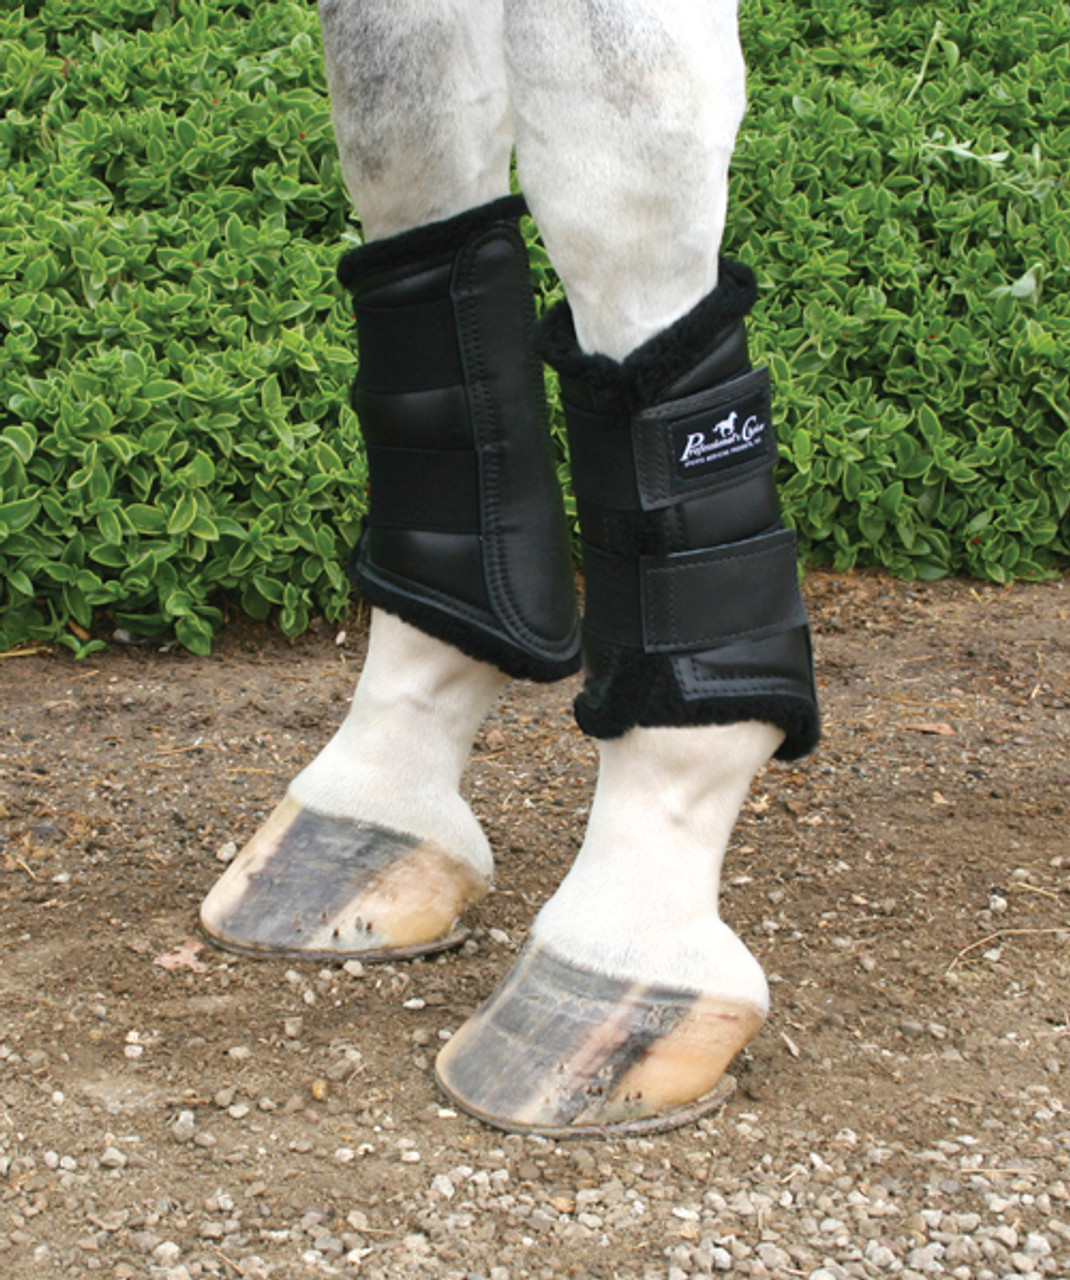 Pro Choice Leather Protection Dressage Boots - Horse Boots